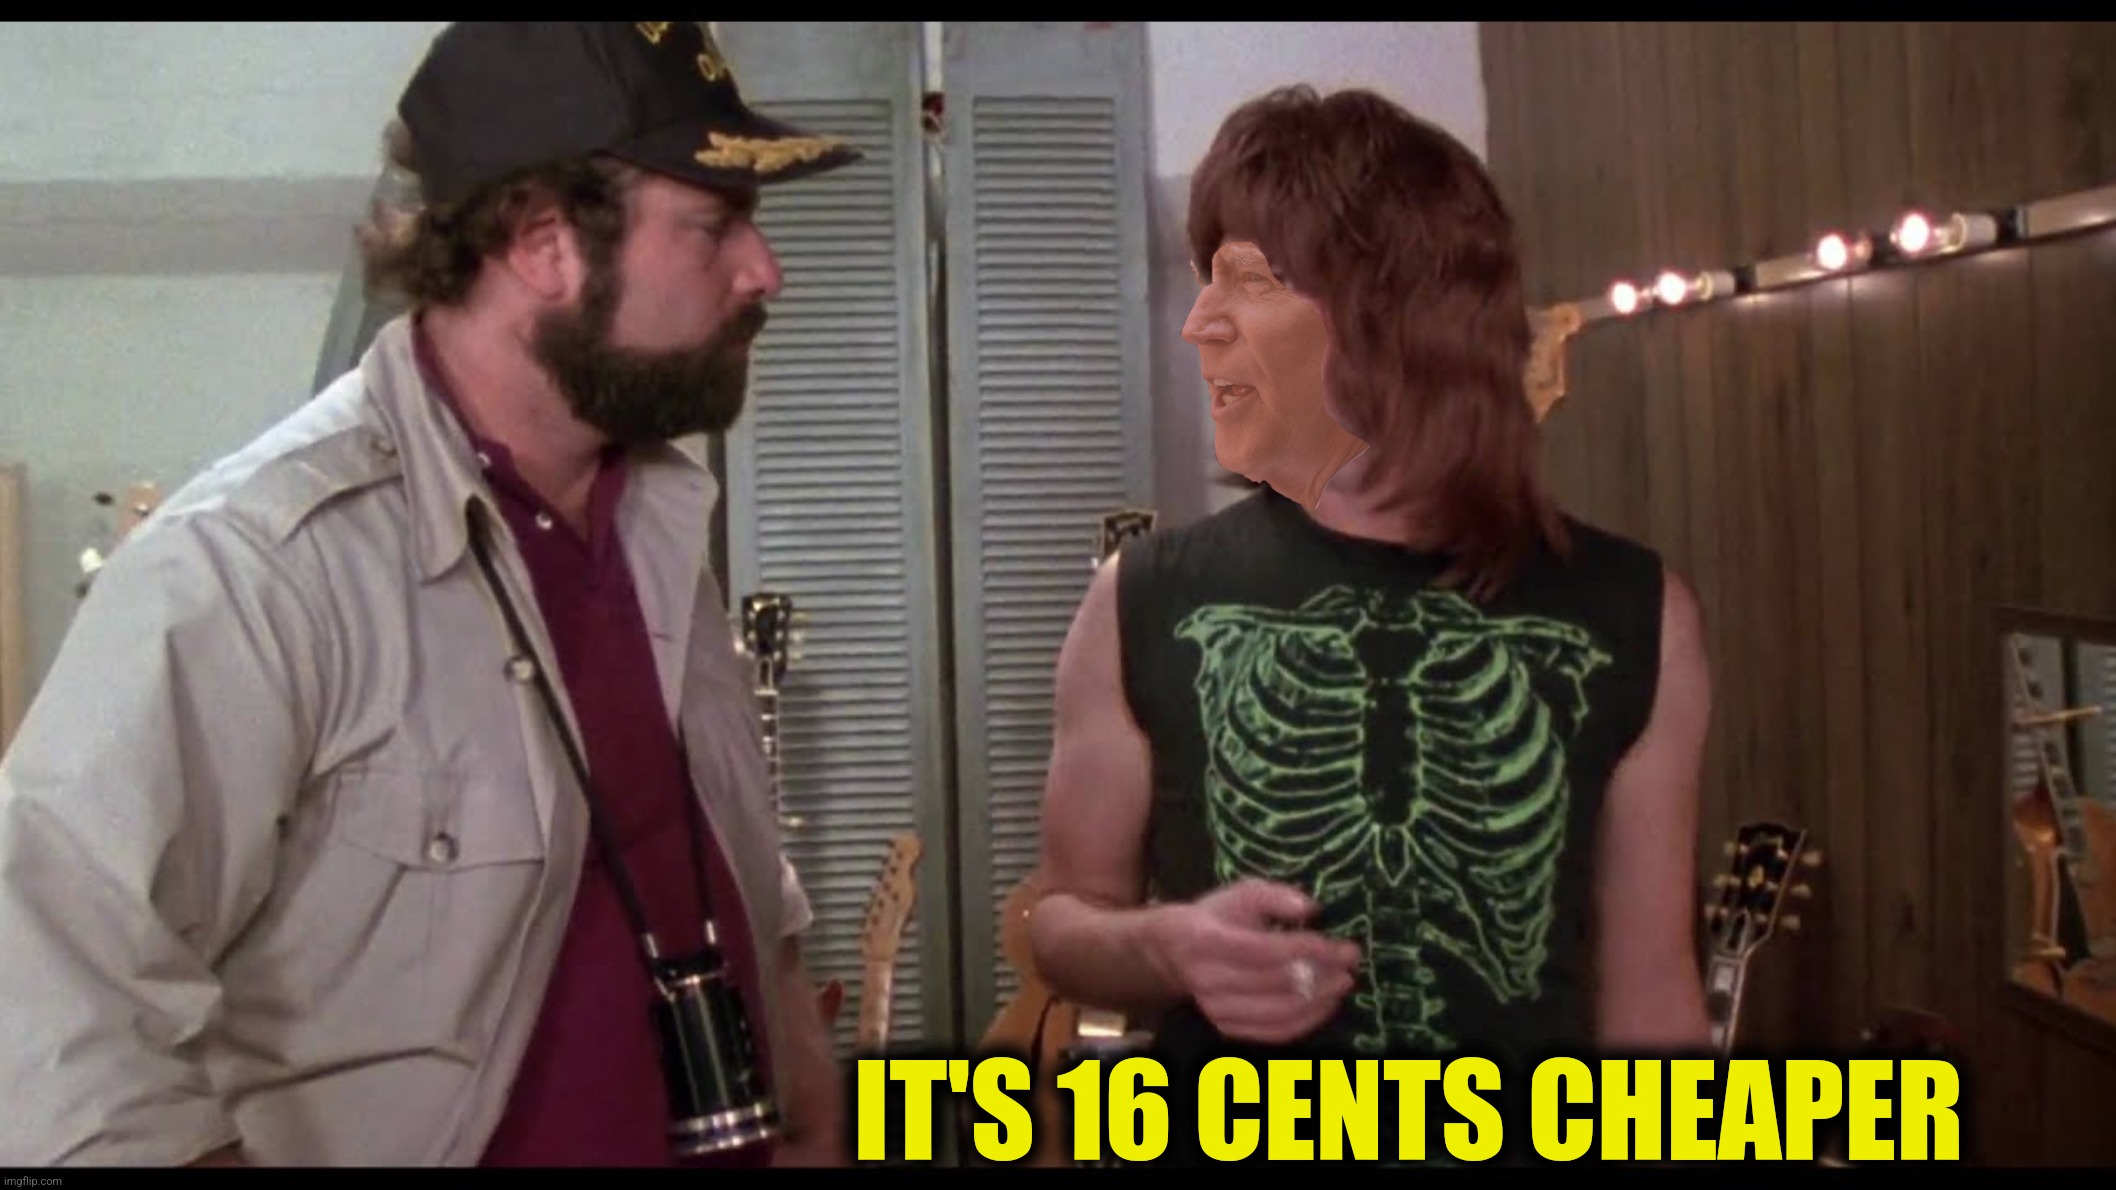 IT'S 16 CENTS CHEAPER | made w/ Imgflip meme maker